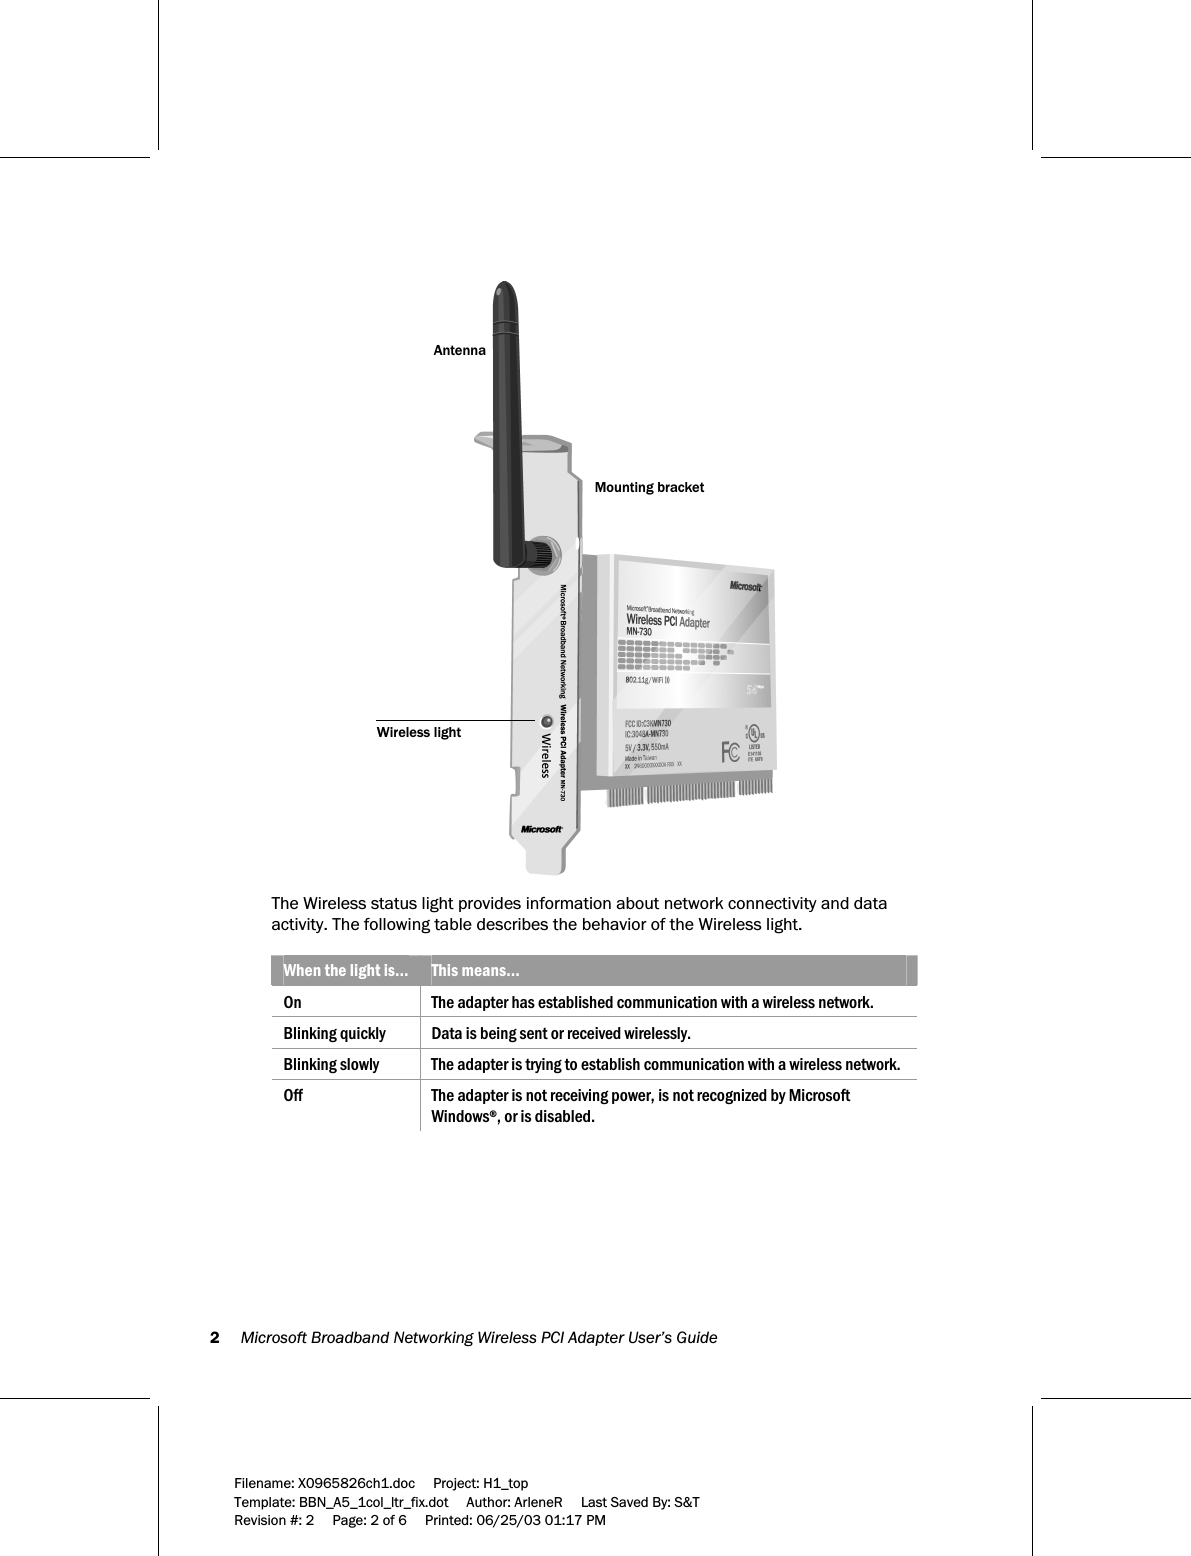 2     Microsoft Broadband Networking Wireless PCI Adapter User’s Guide  Filename: X0965826ch1.doc     Project: H1_top    Template: BBN_A5_1col_ltr_fix.dot     Author: ArleneR     Last Saved By: S&amp;T Revision #: 2     Page: 2 of 6     Printed: 06/25/03 01:17 PM   AntennaMounting bracketWireless light  The Wireless status light provides information about network connectivity and data activity. The following table describes the behavior of the Wireless light.  When the light is…  This means… On  The adapter has established communication with a wireless network. Blinking quickly  Data is being sent or received wirelessly. Blinking slowly  The adapter is trying to establish communication with a wireless network. Off  The adapter is not receiving power, is not recognized by Microsoft Windows®, or is disabled.  